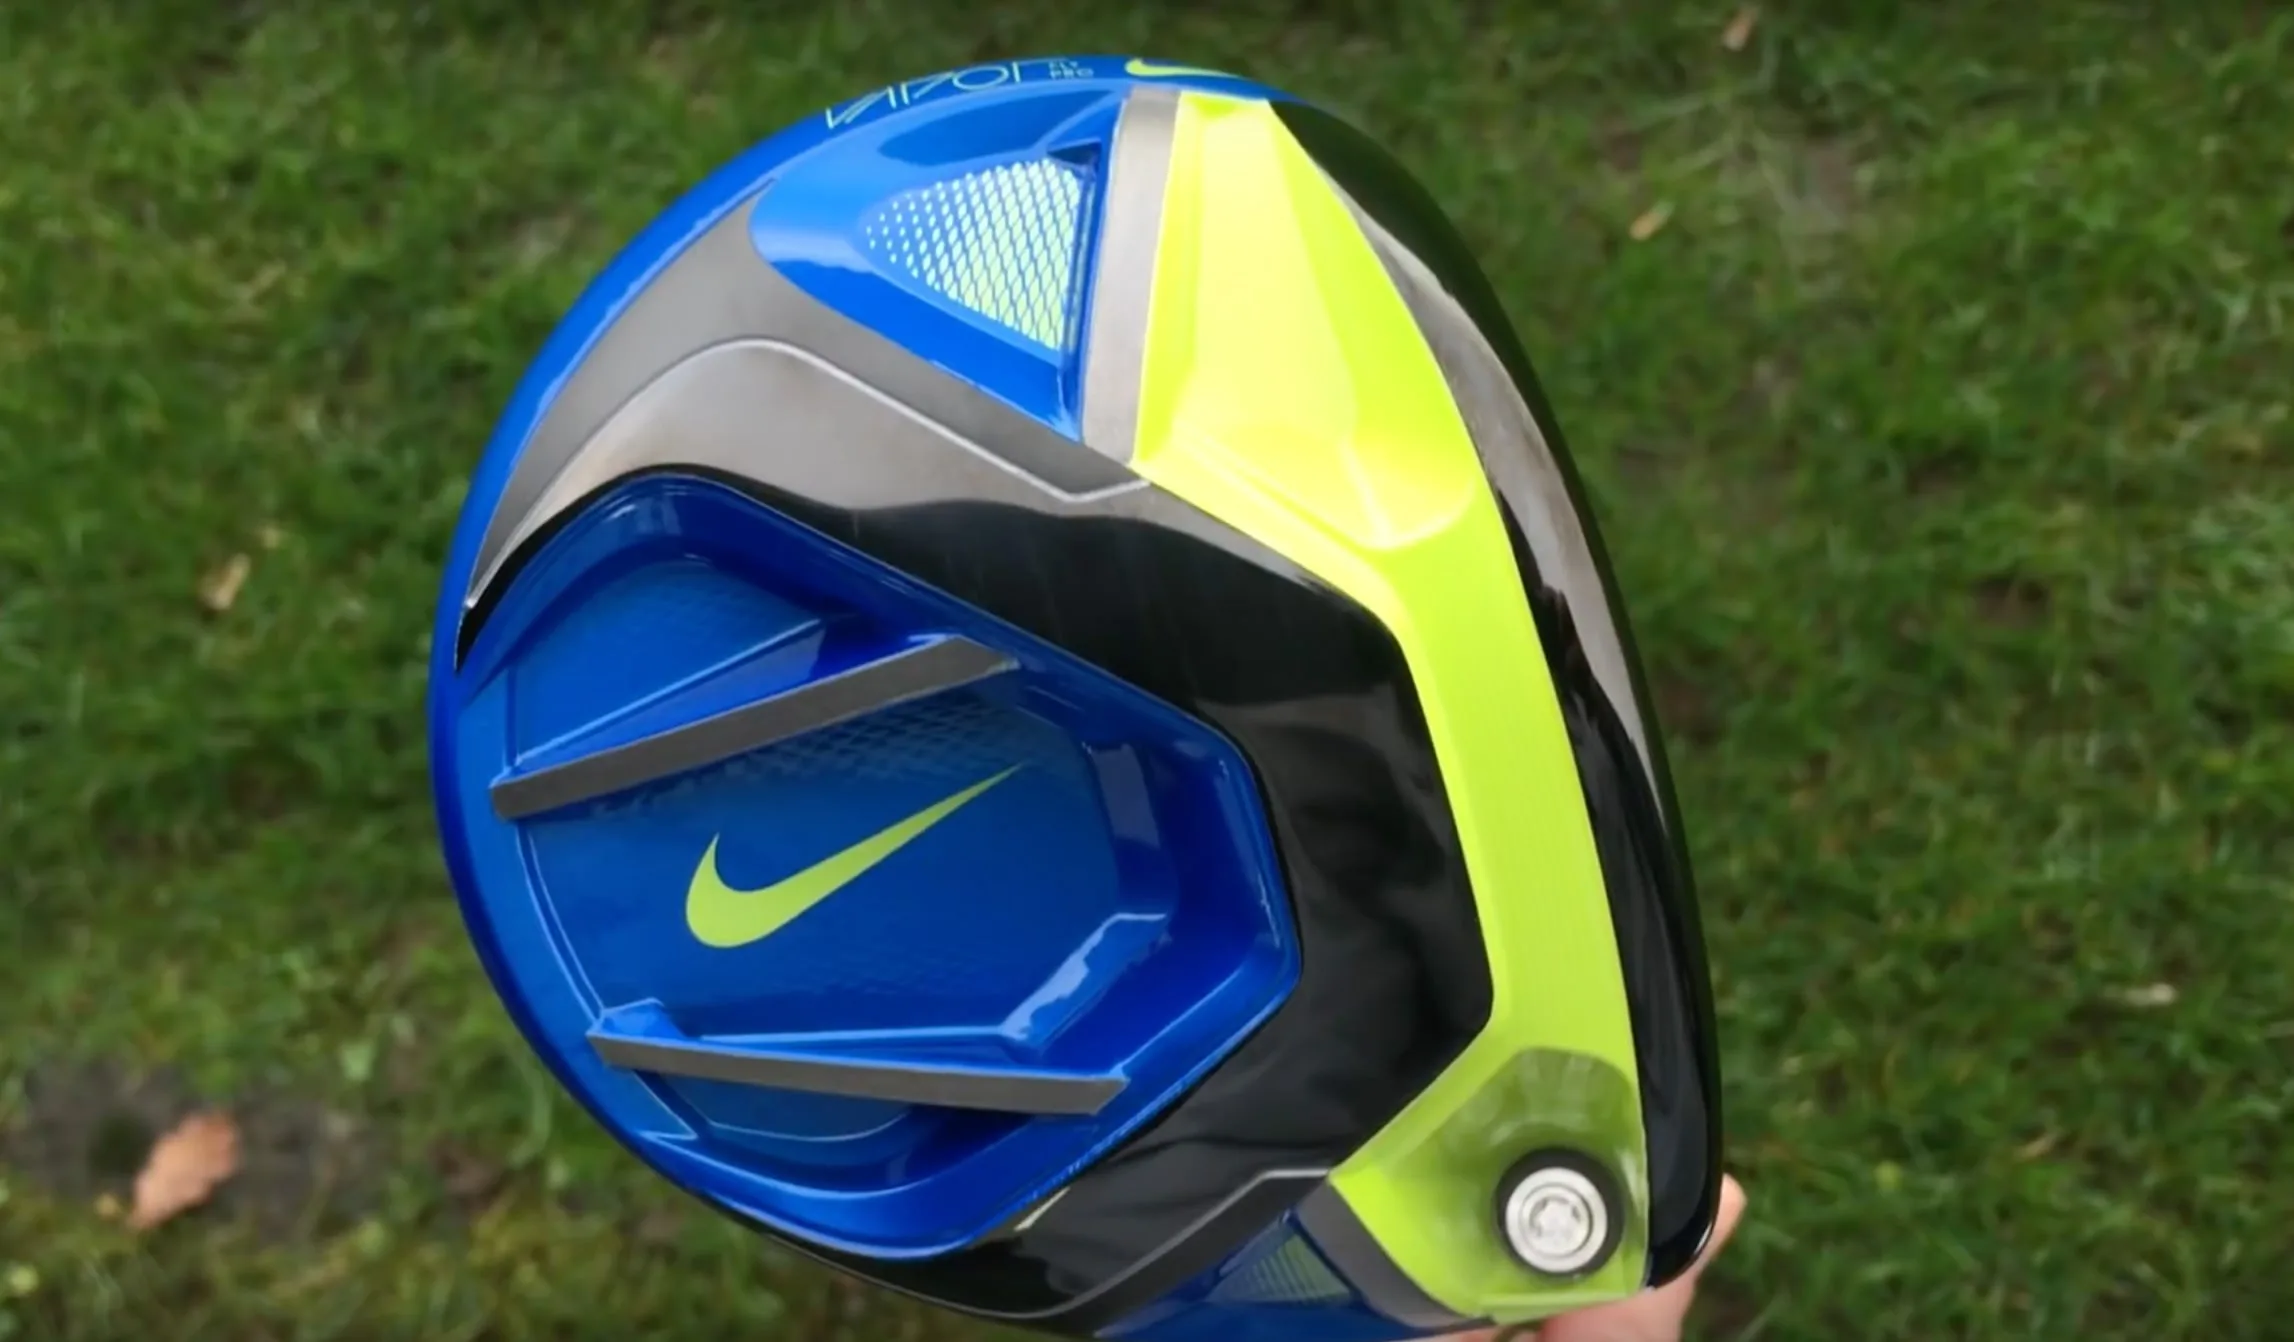 Equipment: New Nike Vapor Fly drivers review